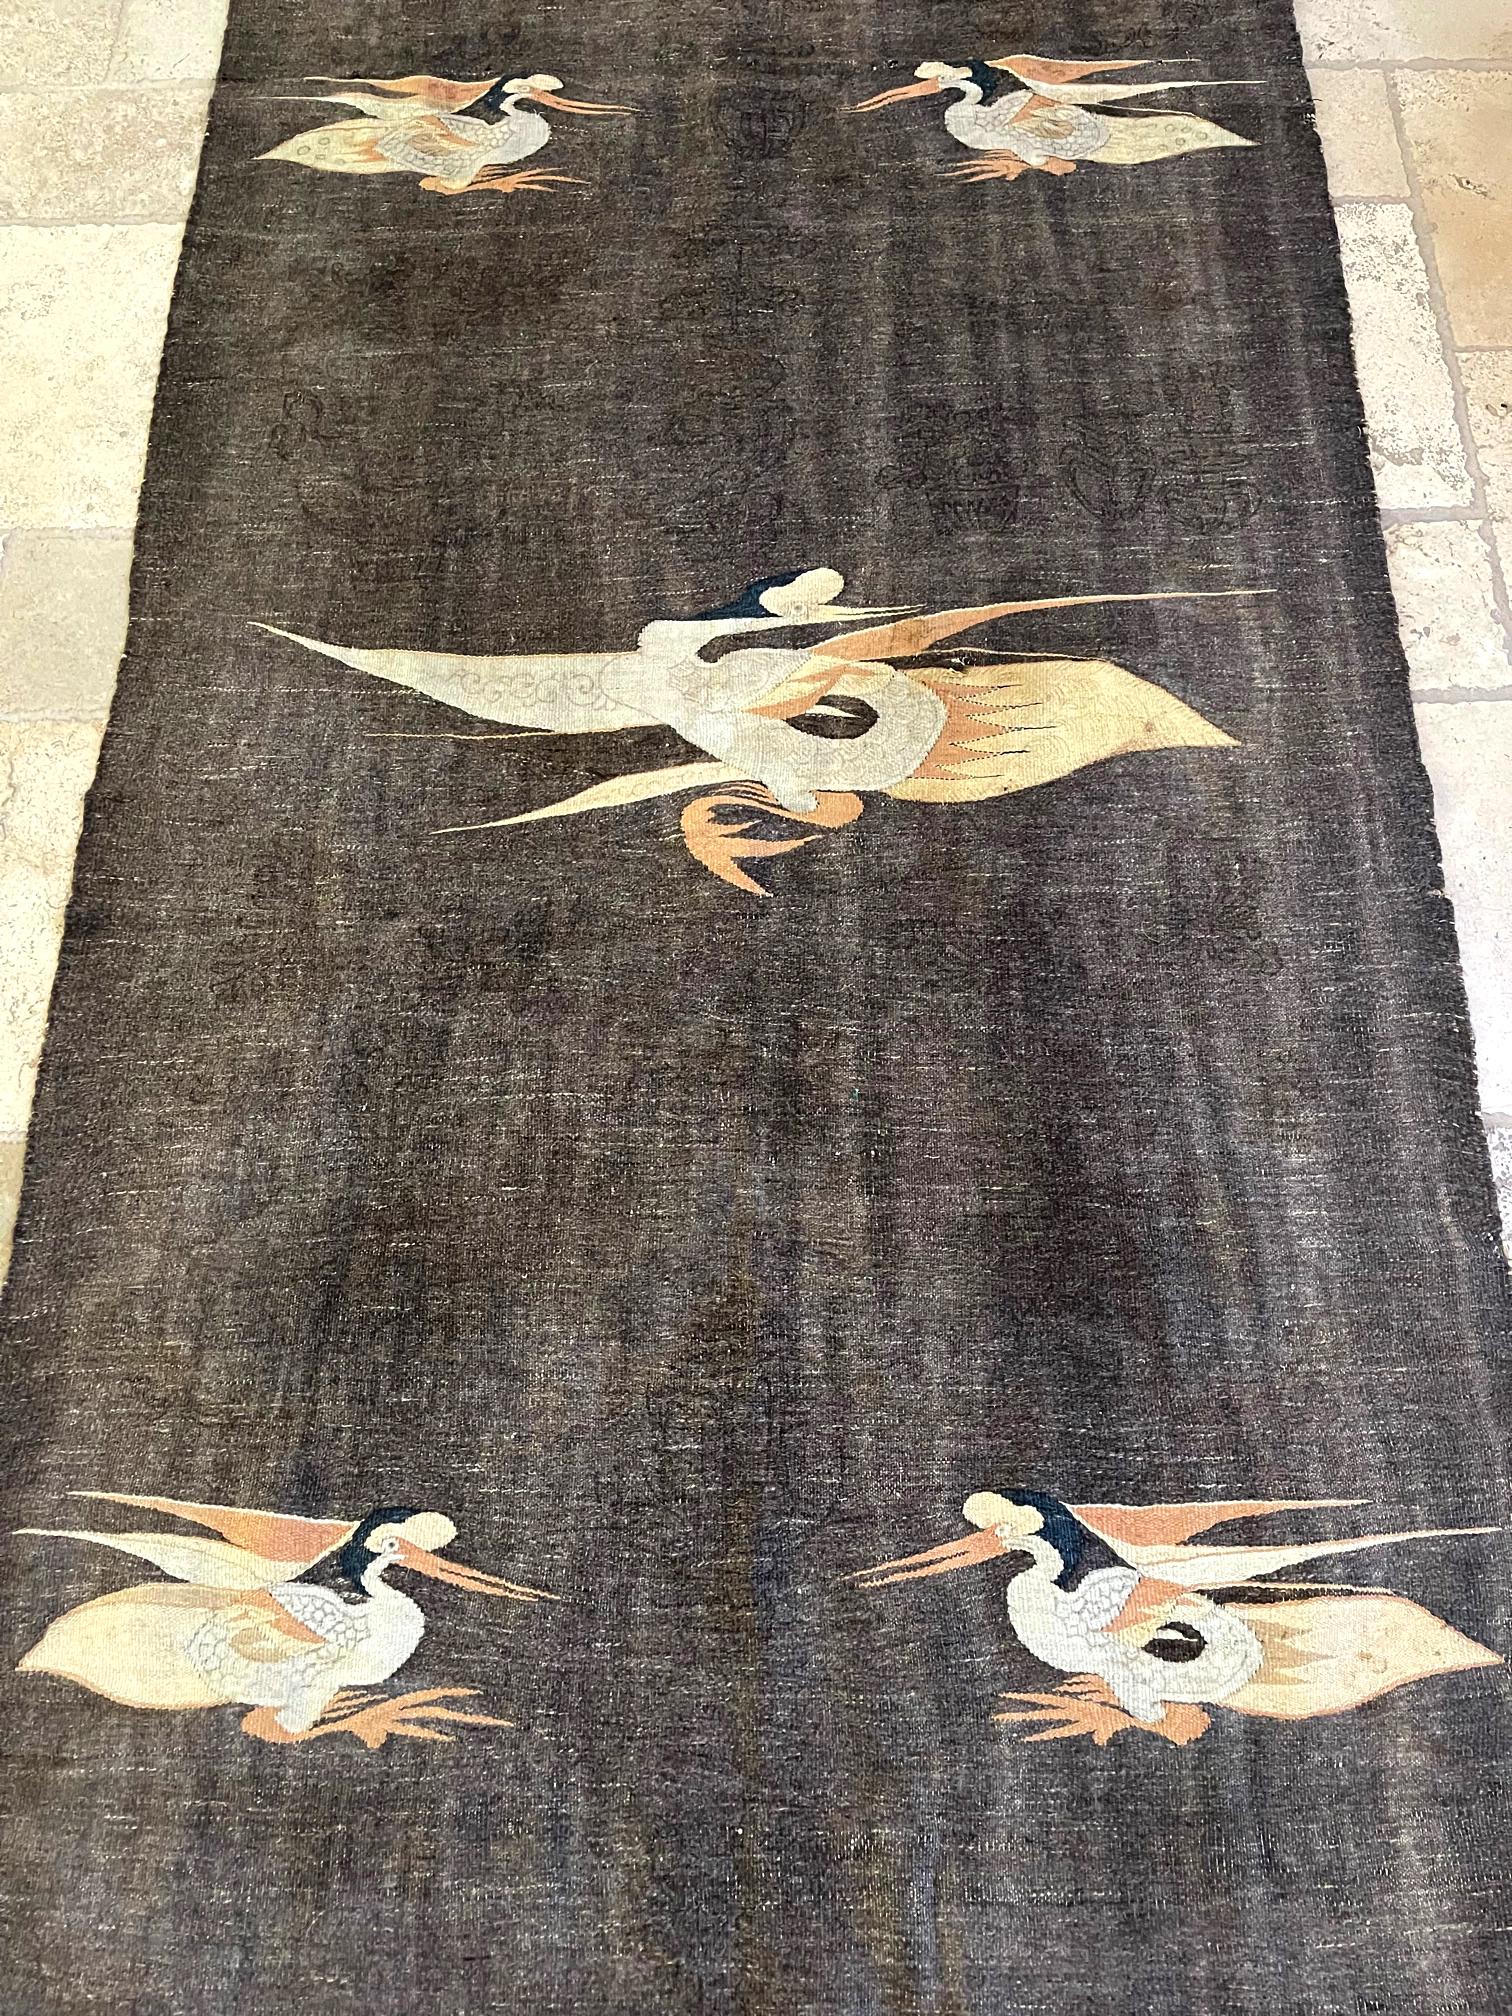 A large wall hanging tapestry, adapted from its previous life as a curtain panel in Tibet (circa late 19th to early 20th century). The textile panel was woven from a coarse wool material (may be yak) and features five stylized crane motifs in subtly